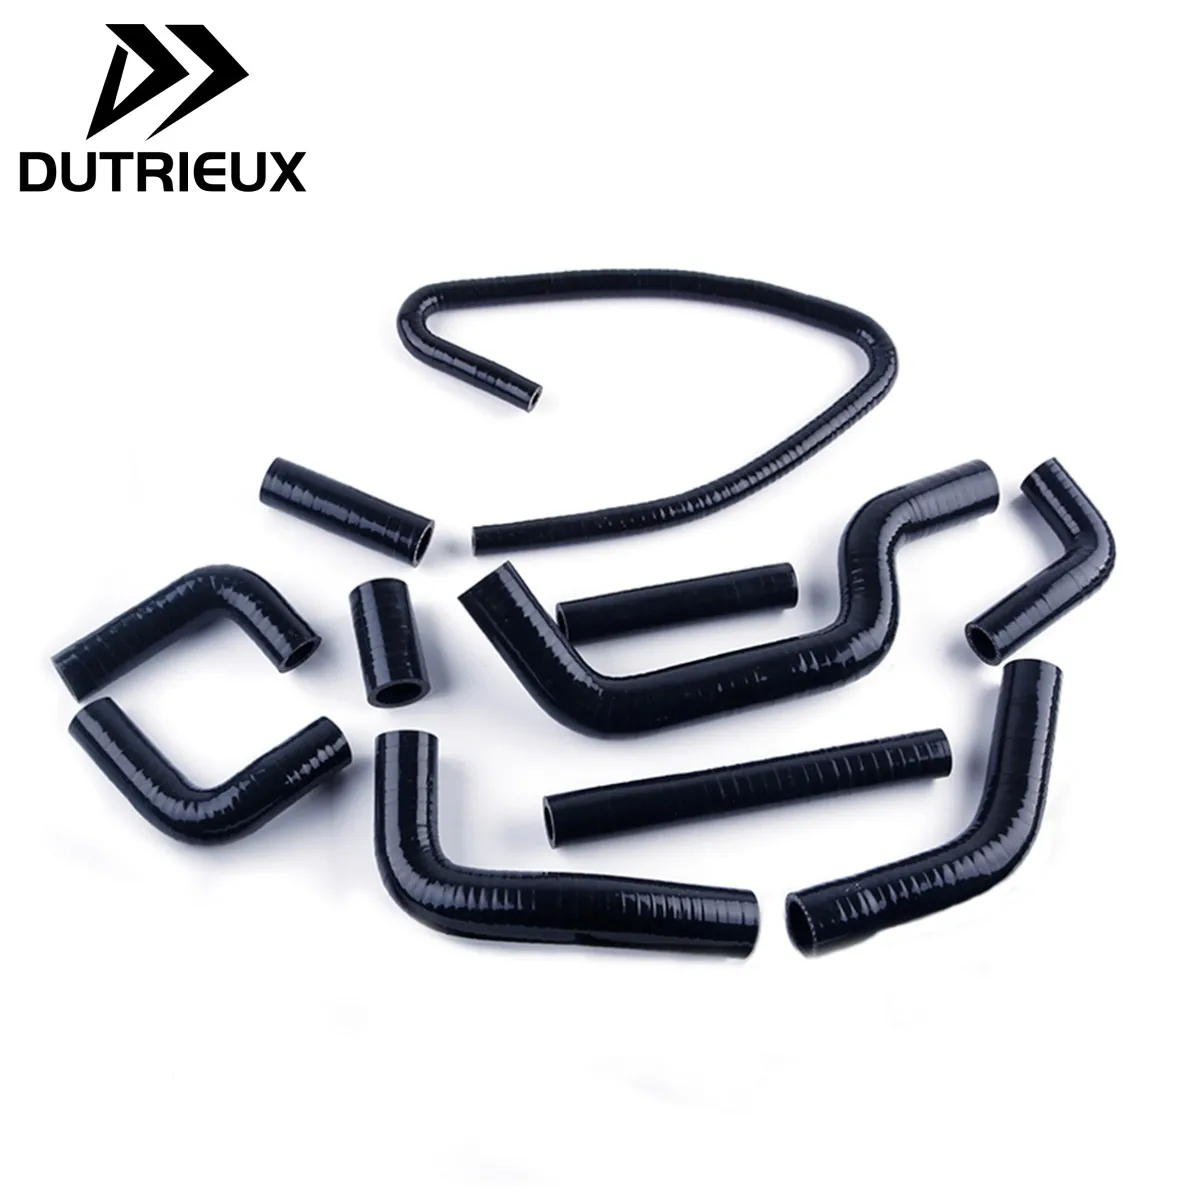 

For 2001-2008 Ducati Monster S4 S4R Motorcycle Silicone Radiator Coolant Hose Kit 2002 2003 2004 2005 2006 2007